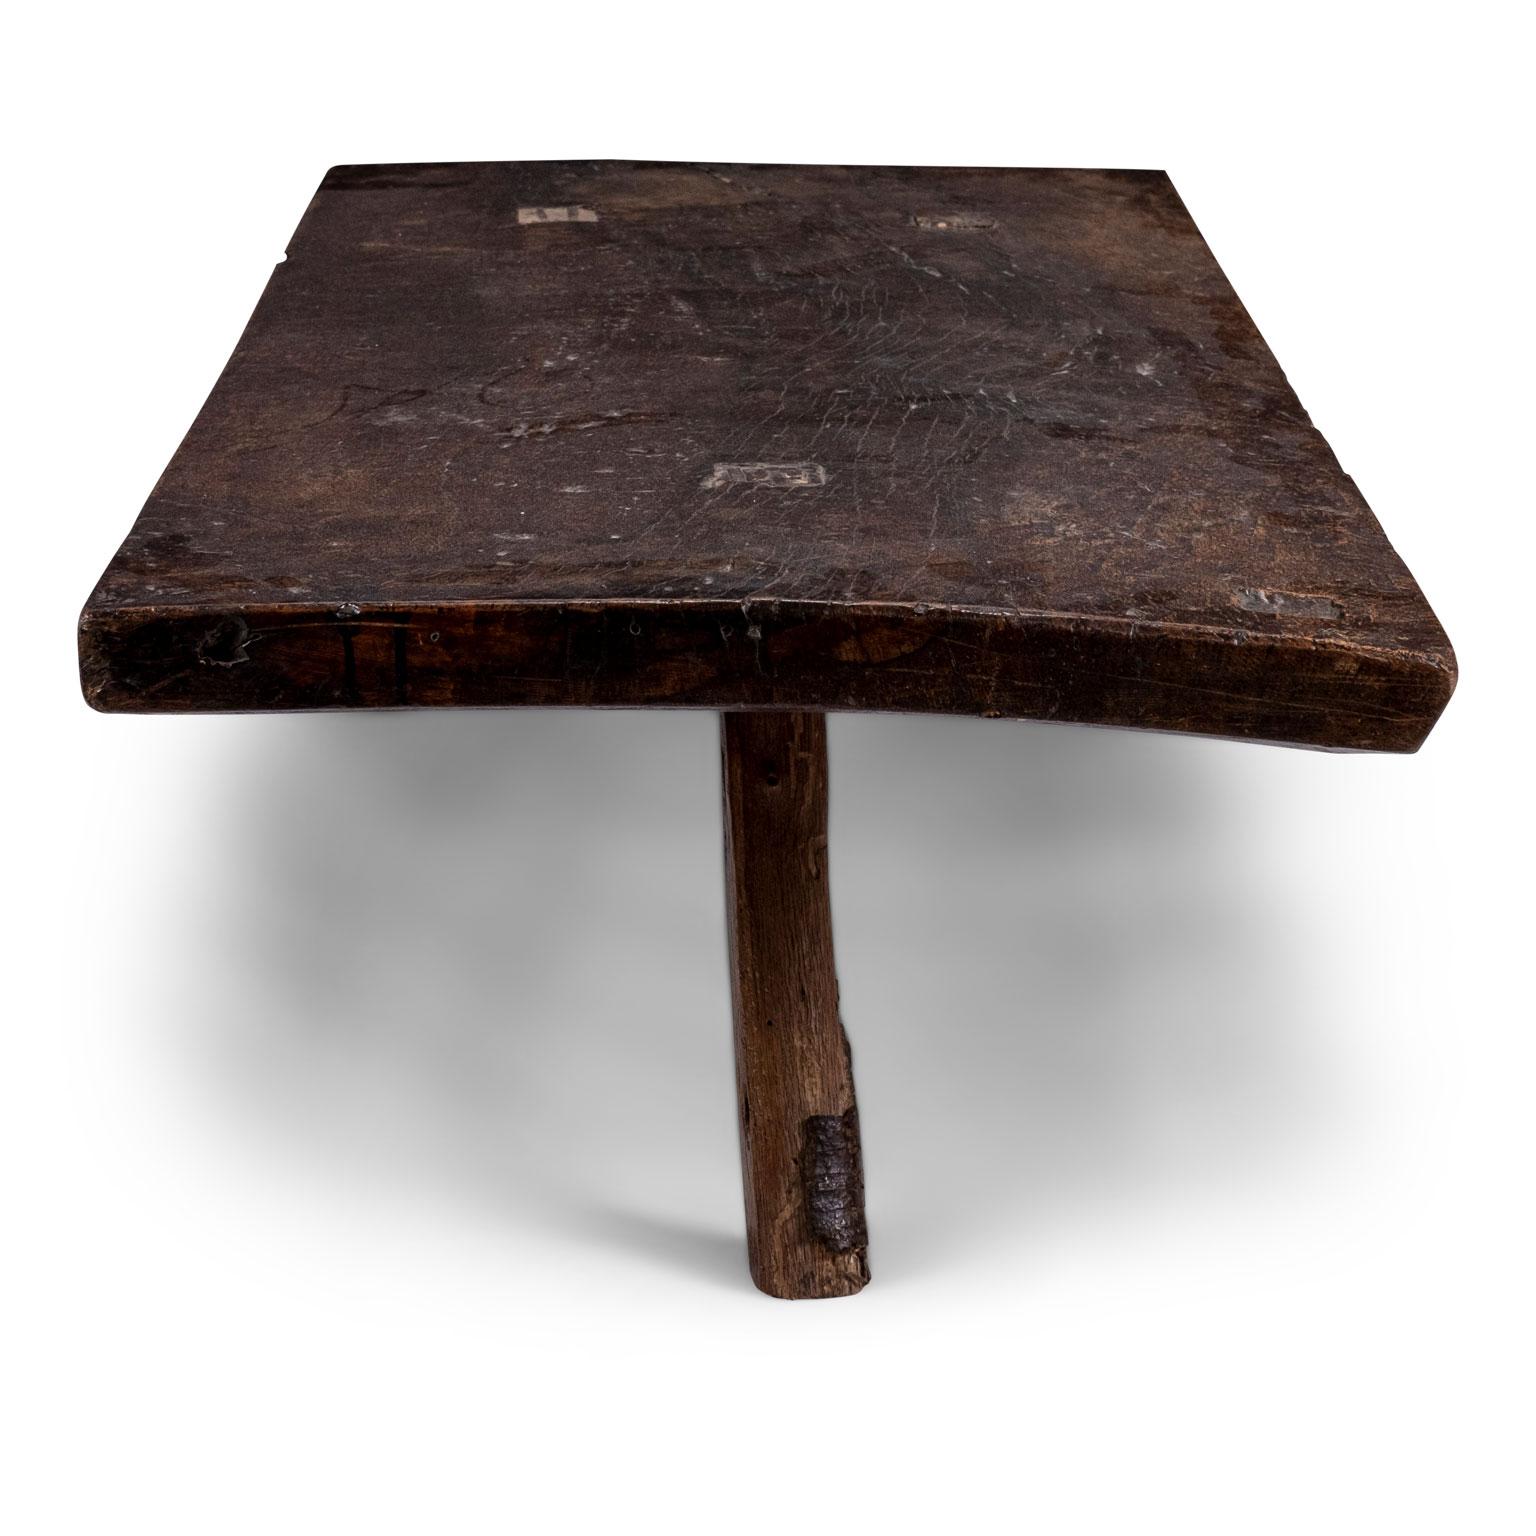 Vintage walnut coffee table, made from a thick single slab of wood (circa 19th century), supported by three simple square-shape legs. Pegged construction.